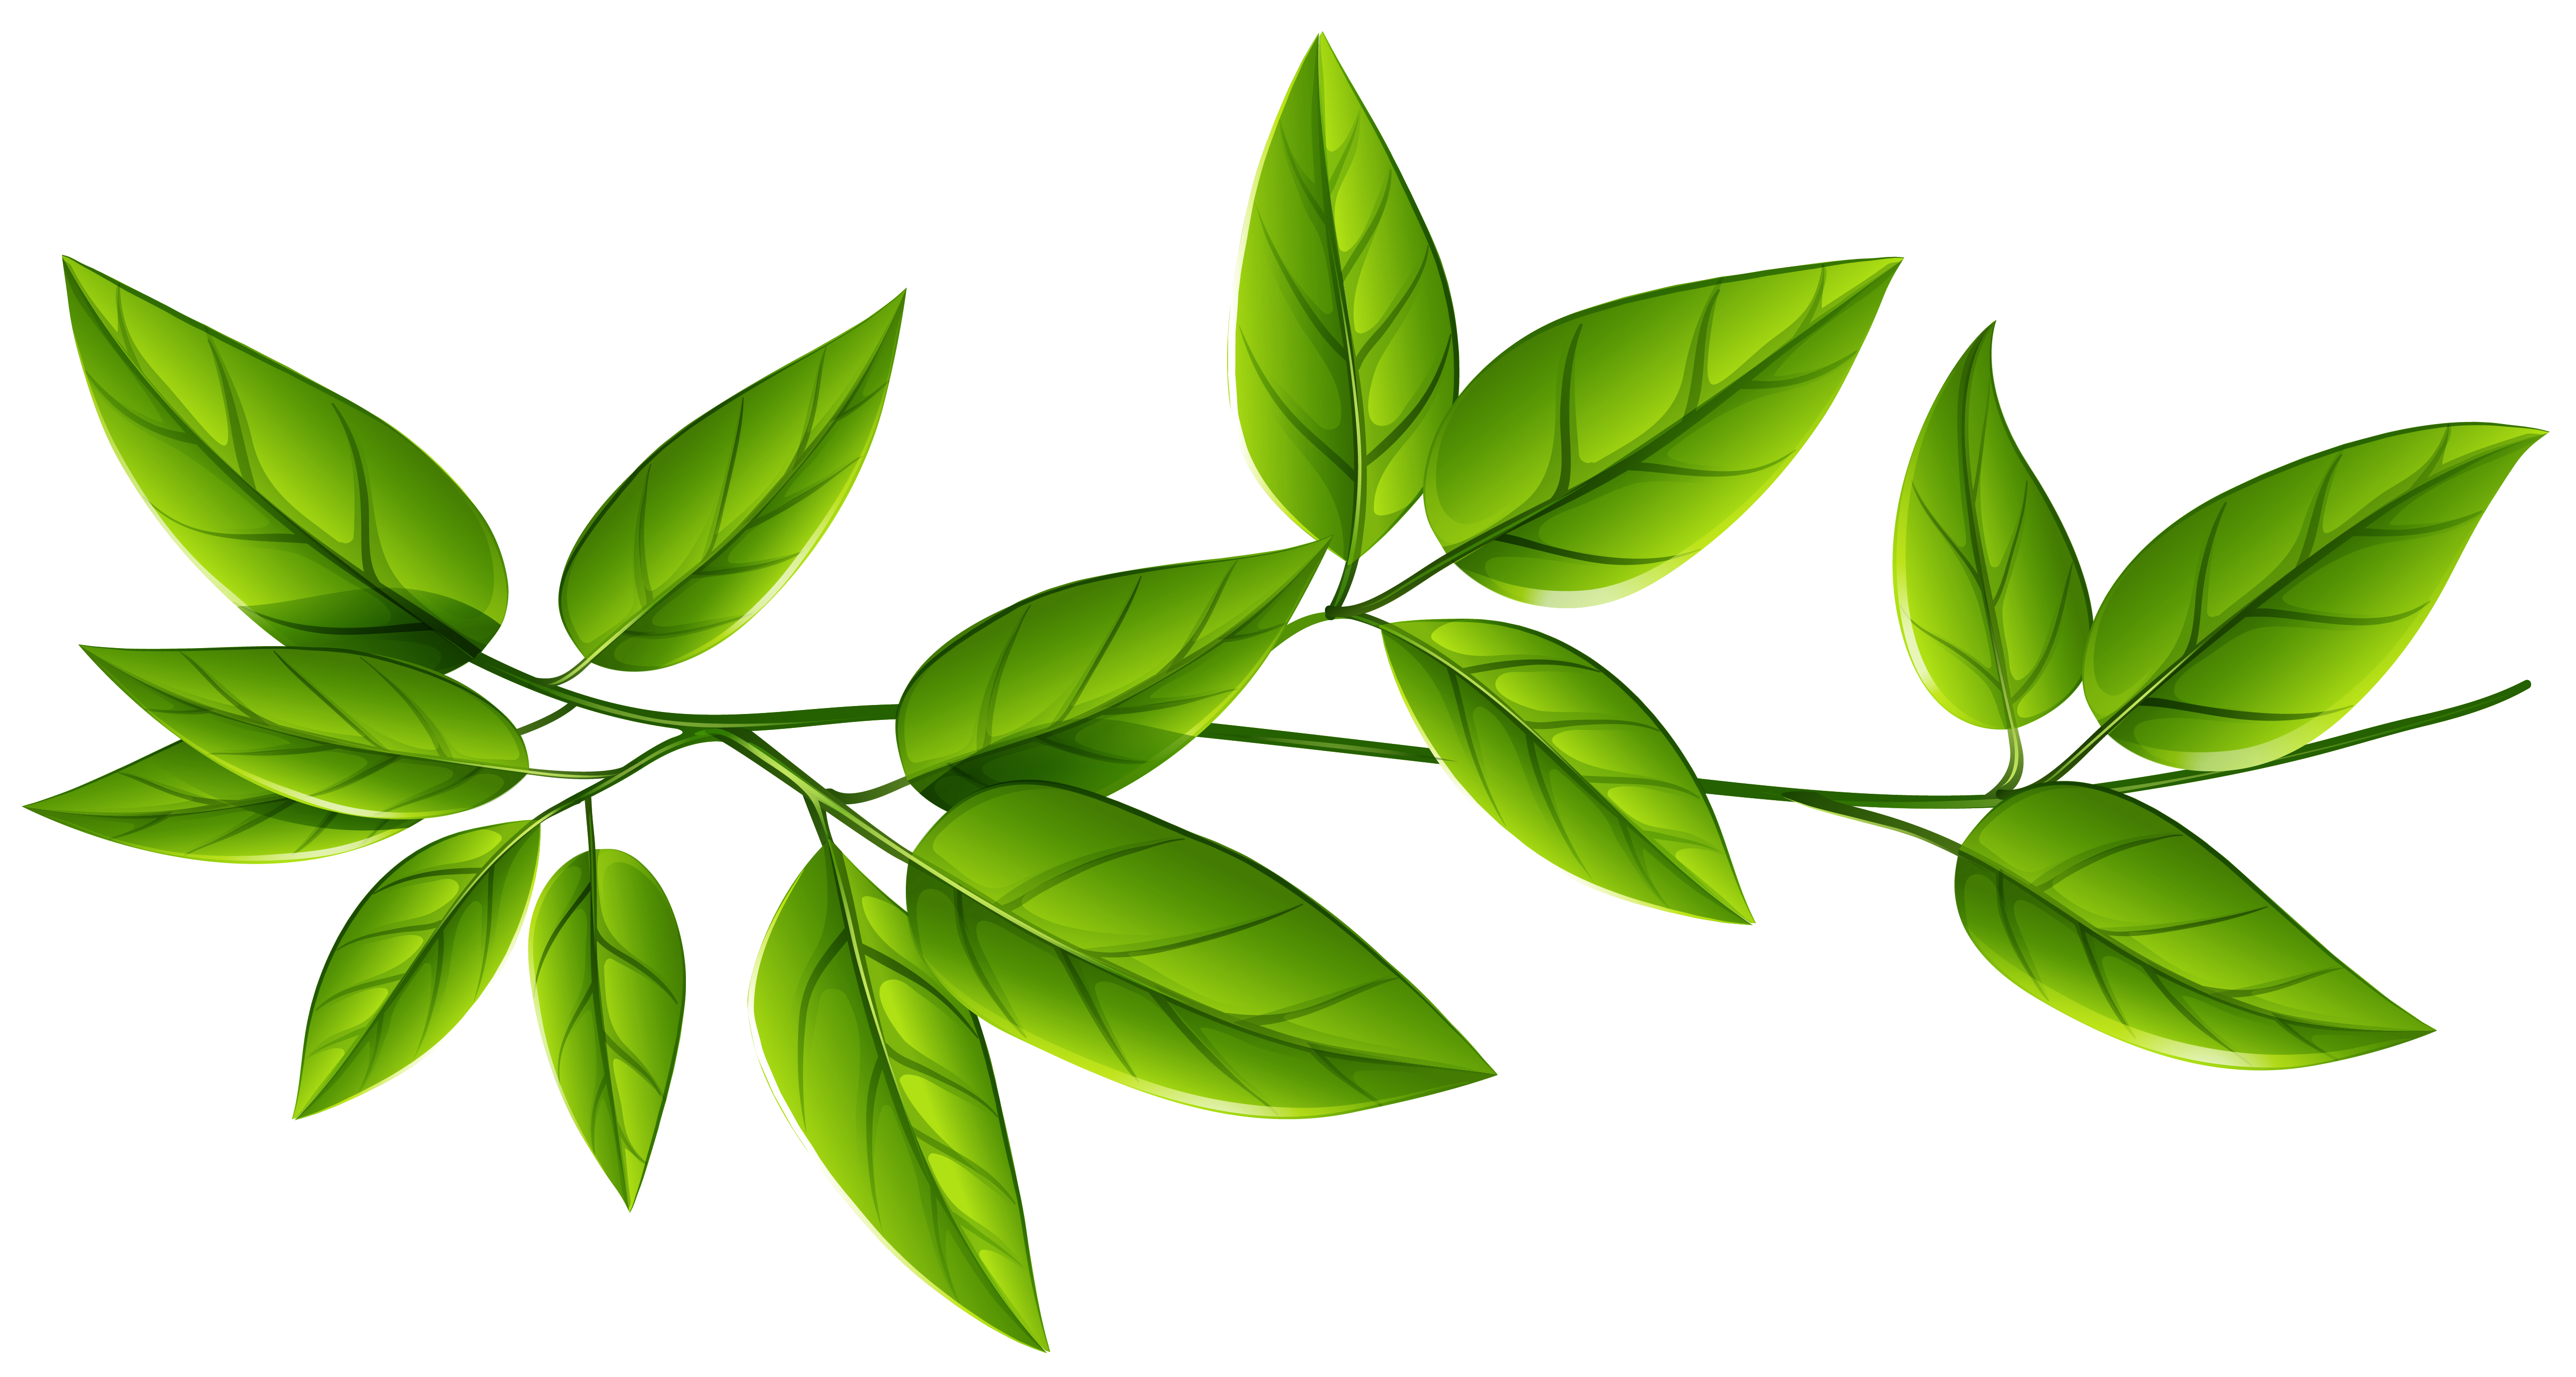 https://gallery.yopriceville.com/var/albums/Free-Clipart-Pictures/Decorative-Elements-PNG/Green_Leaves_PNG_Image.png?m=1439866501